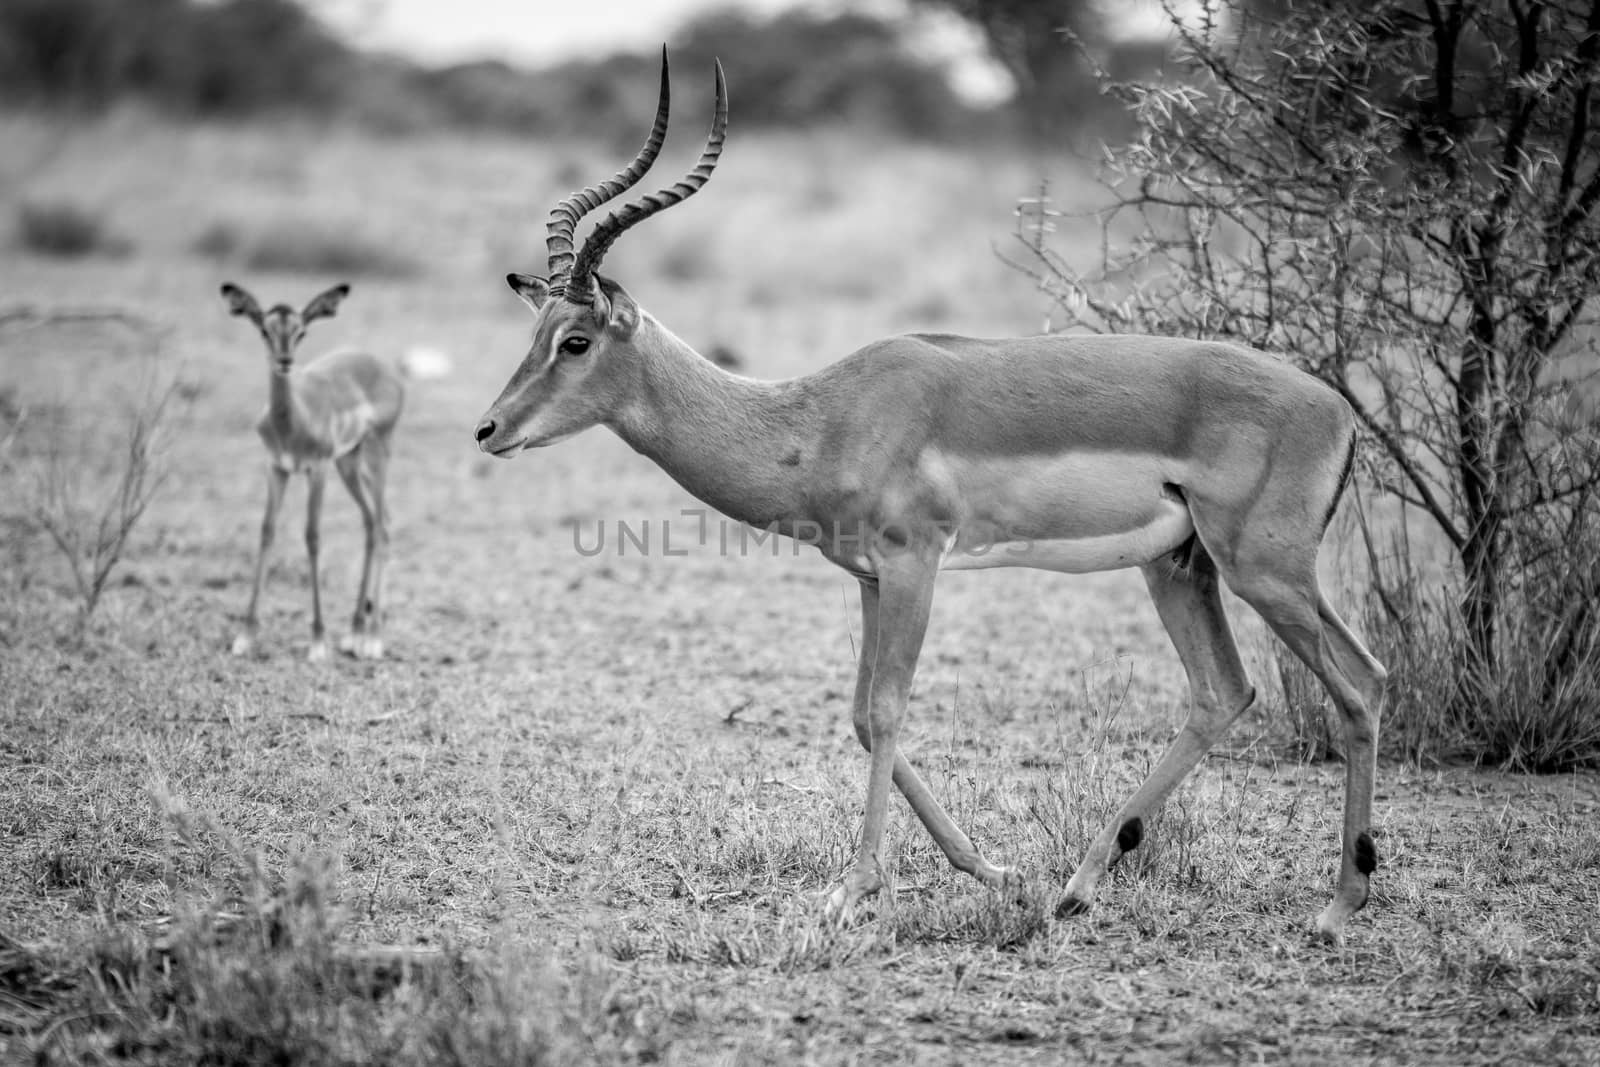 Male Impala in black and white in the Kruger National Park, South Africa.